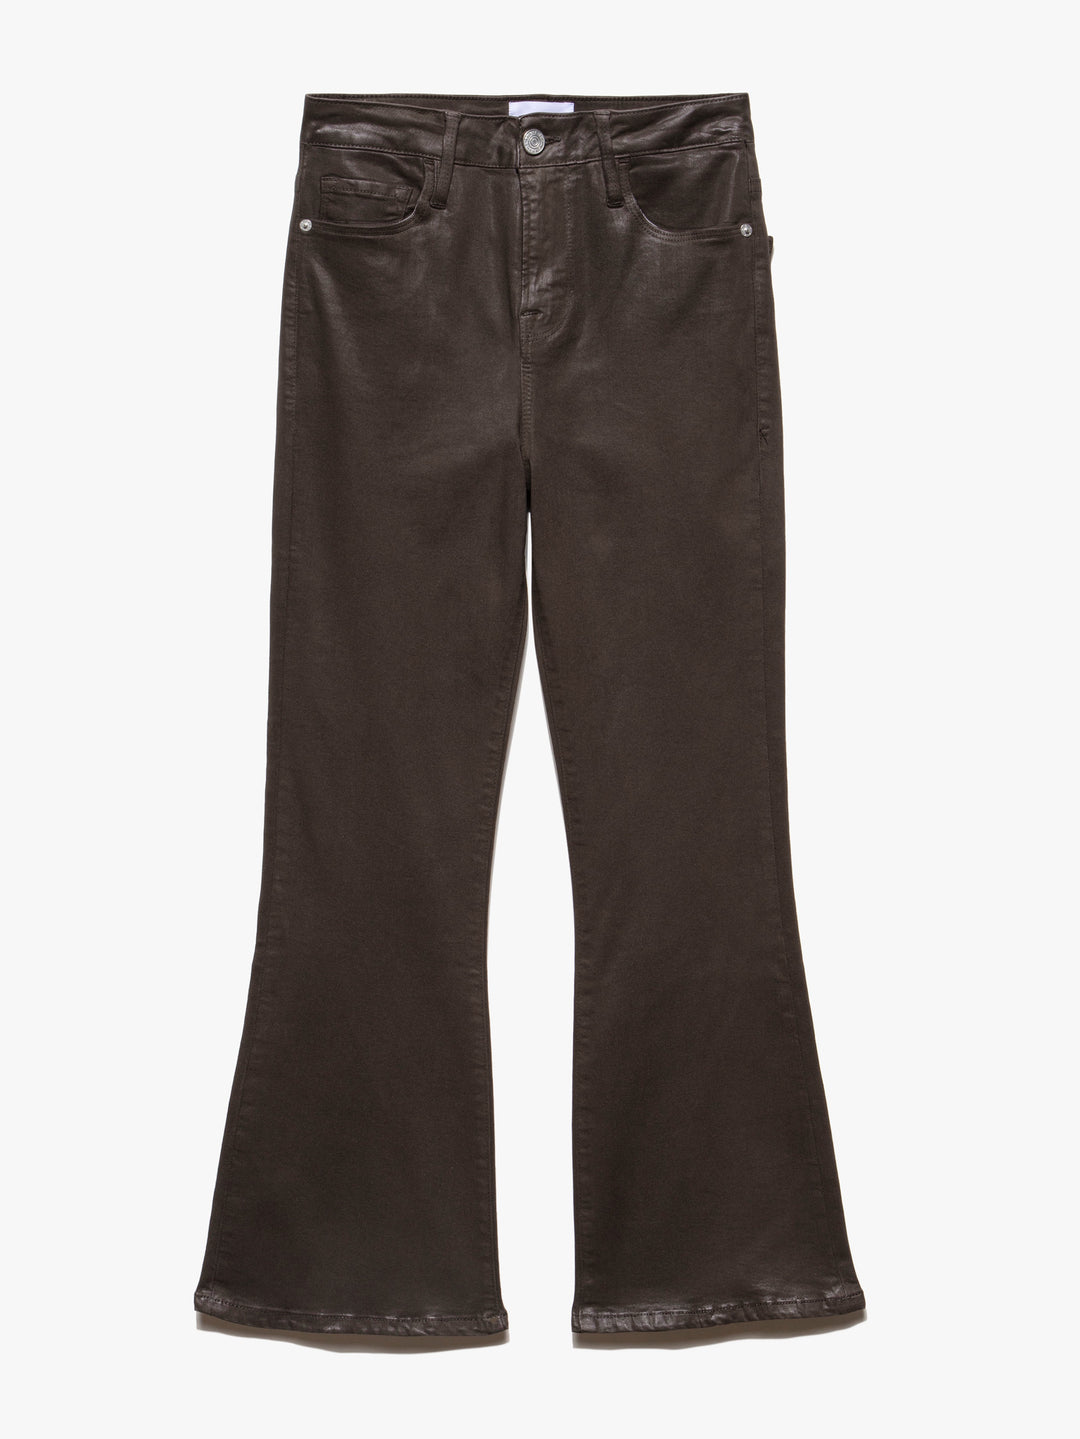 Le Crop Flare in Espresso Coated